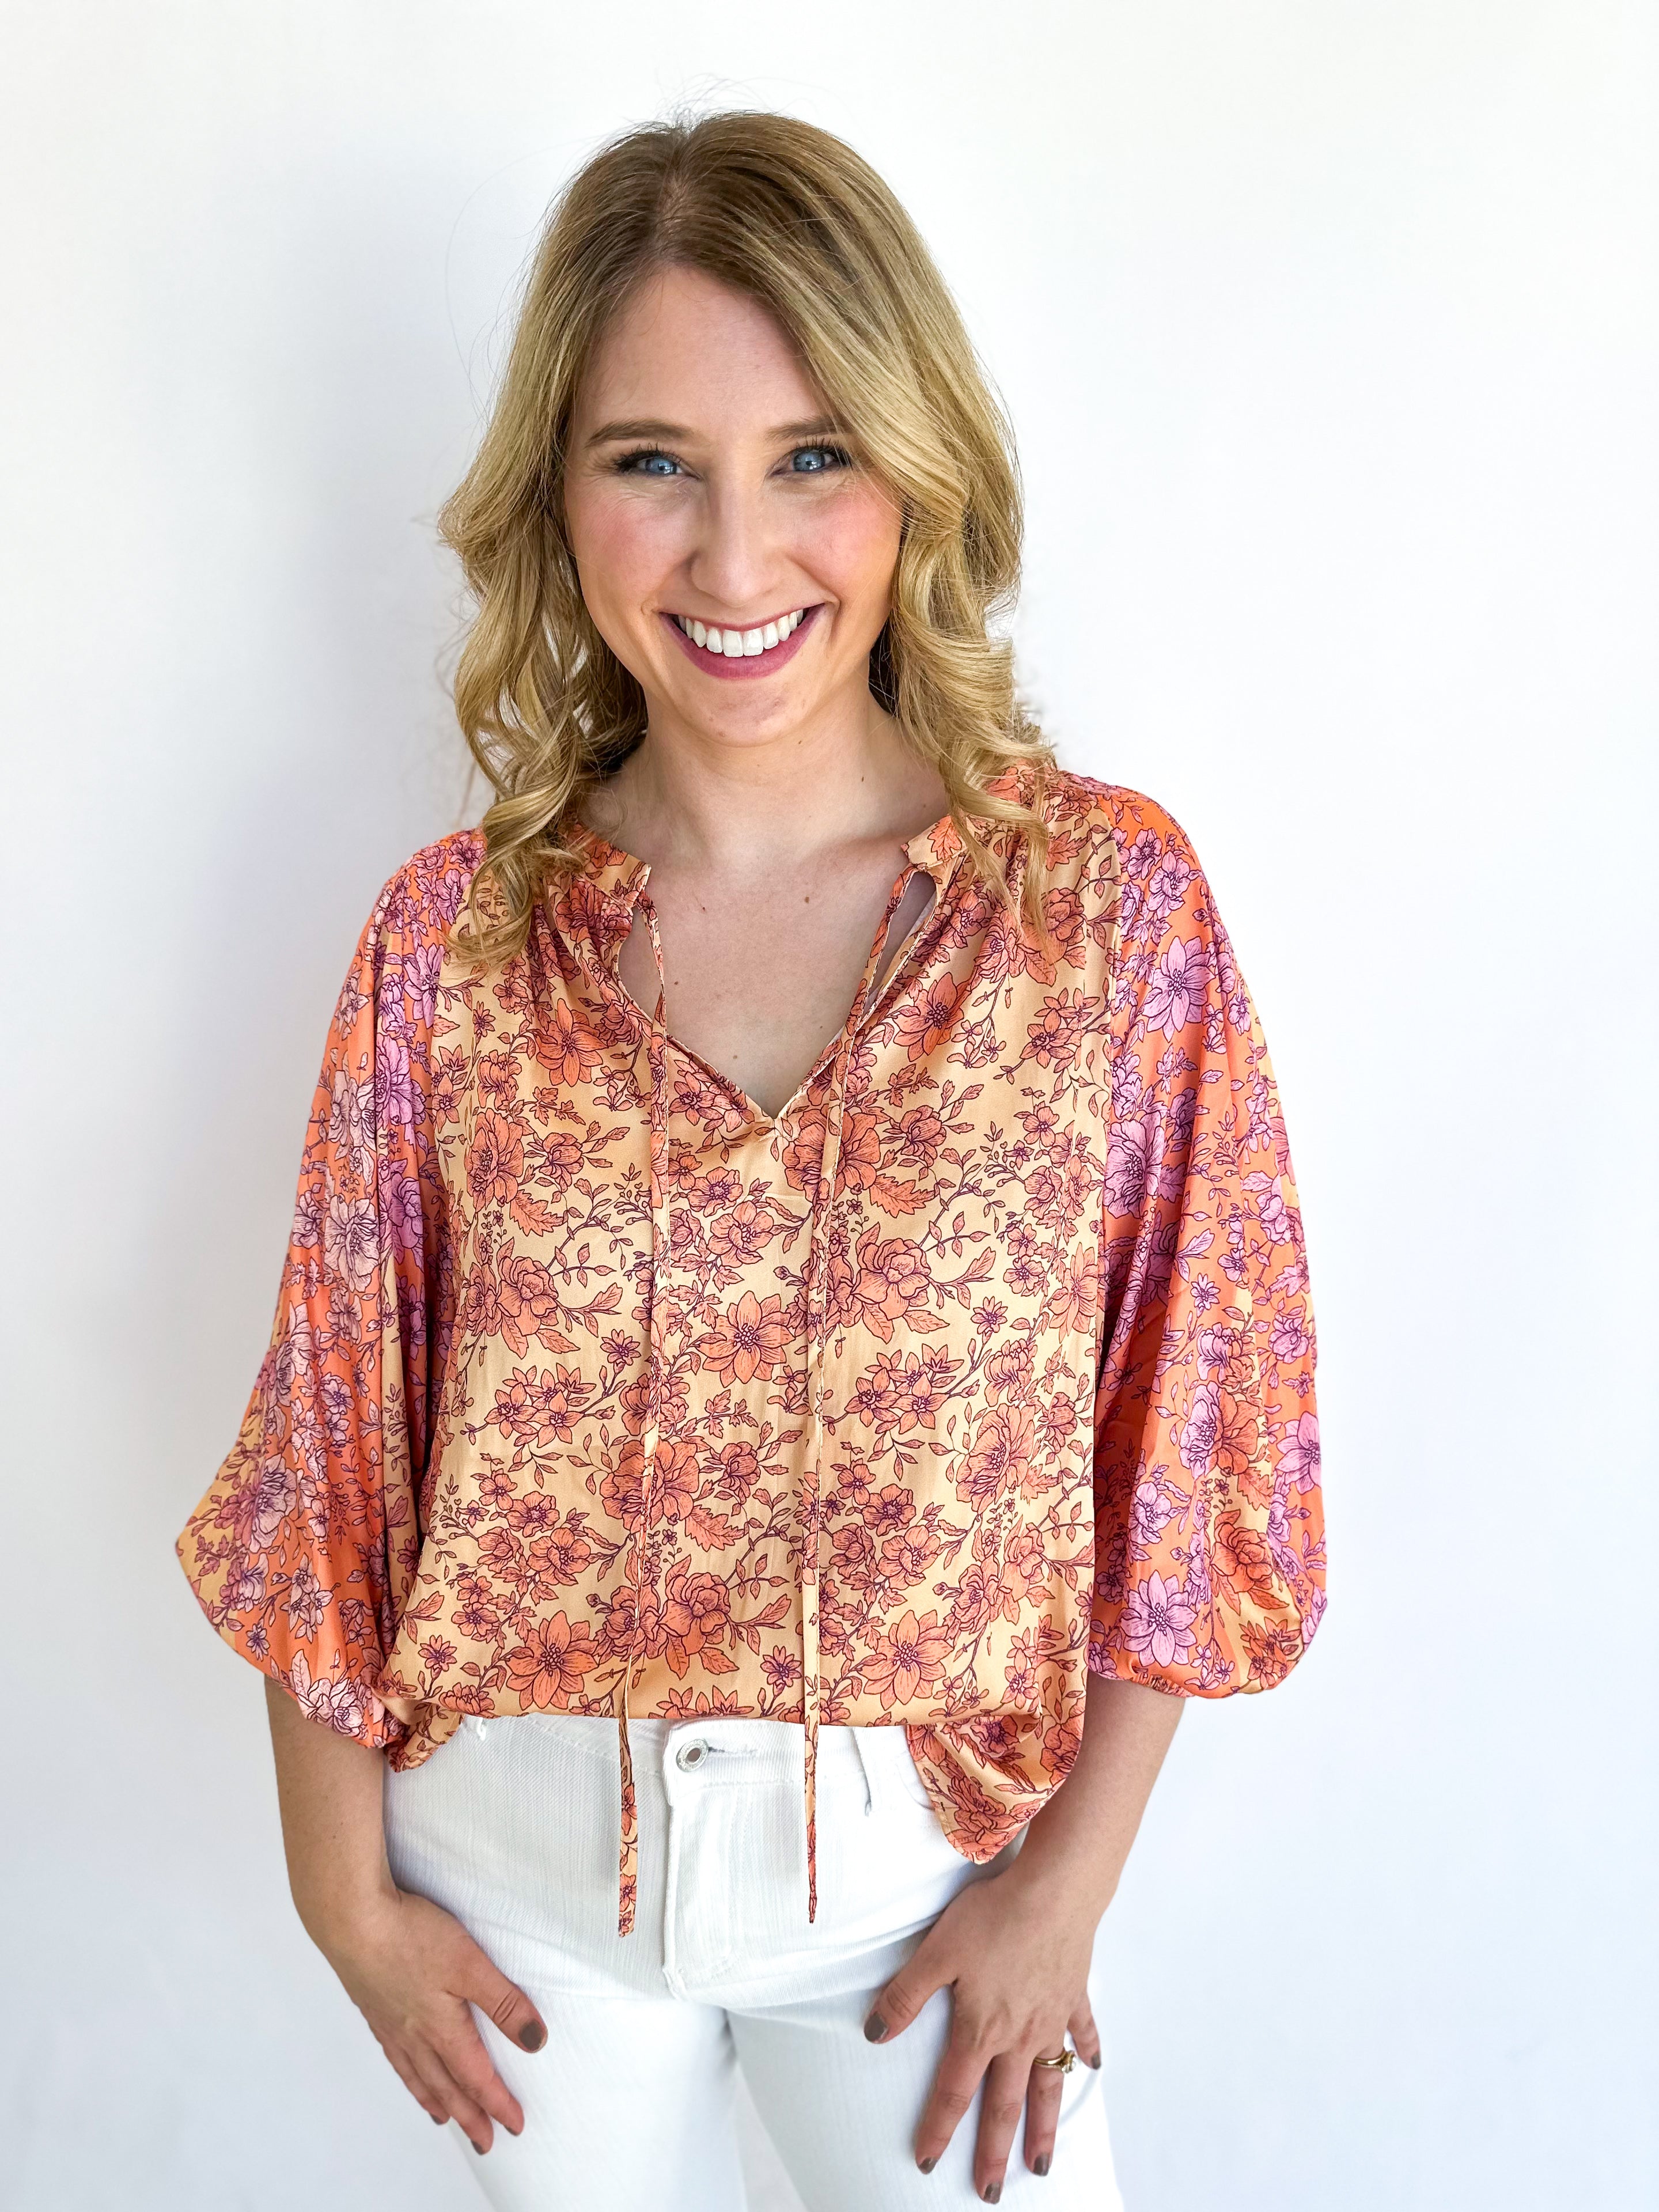 Spring is Coming Blouse - Peach-200 Fashion Blouses-CURRENT AIR CLOTHING-July & June Women's Fashion Boutique Located in San Antonio, Texas